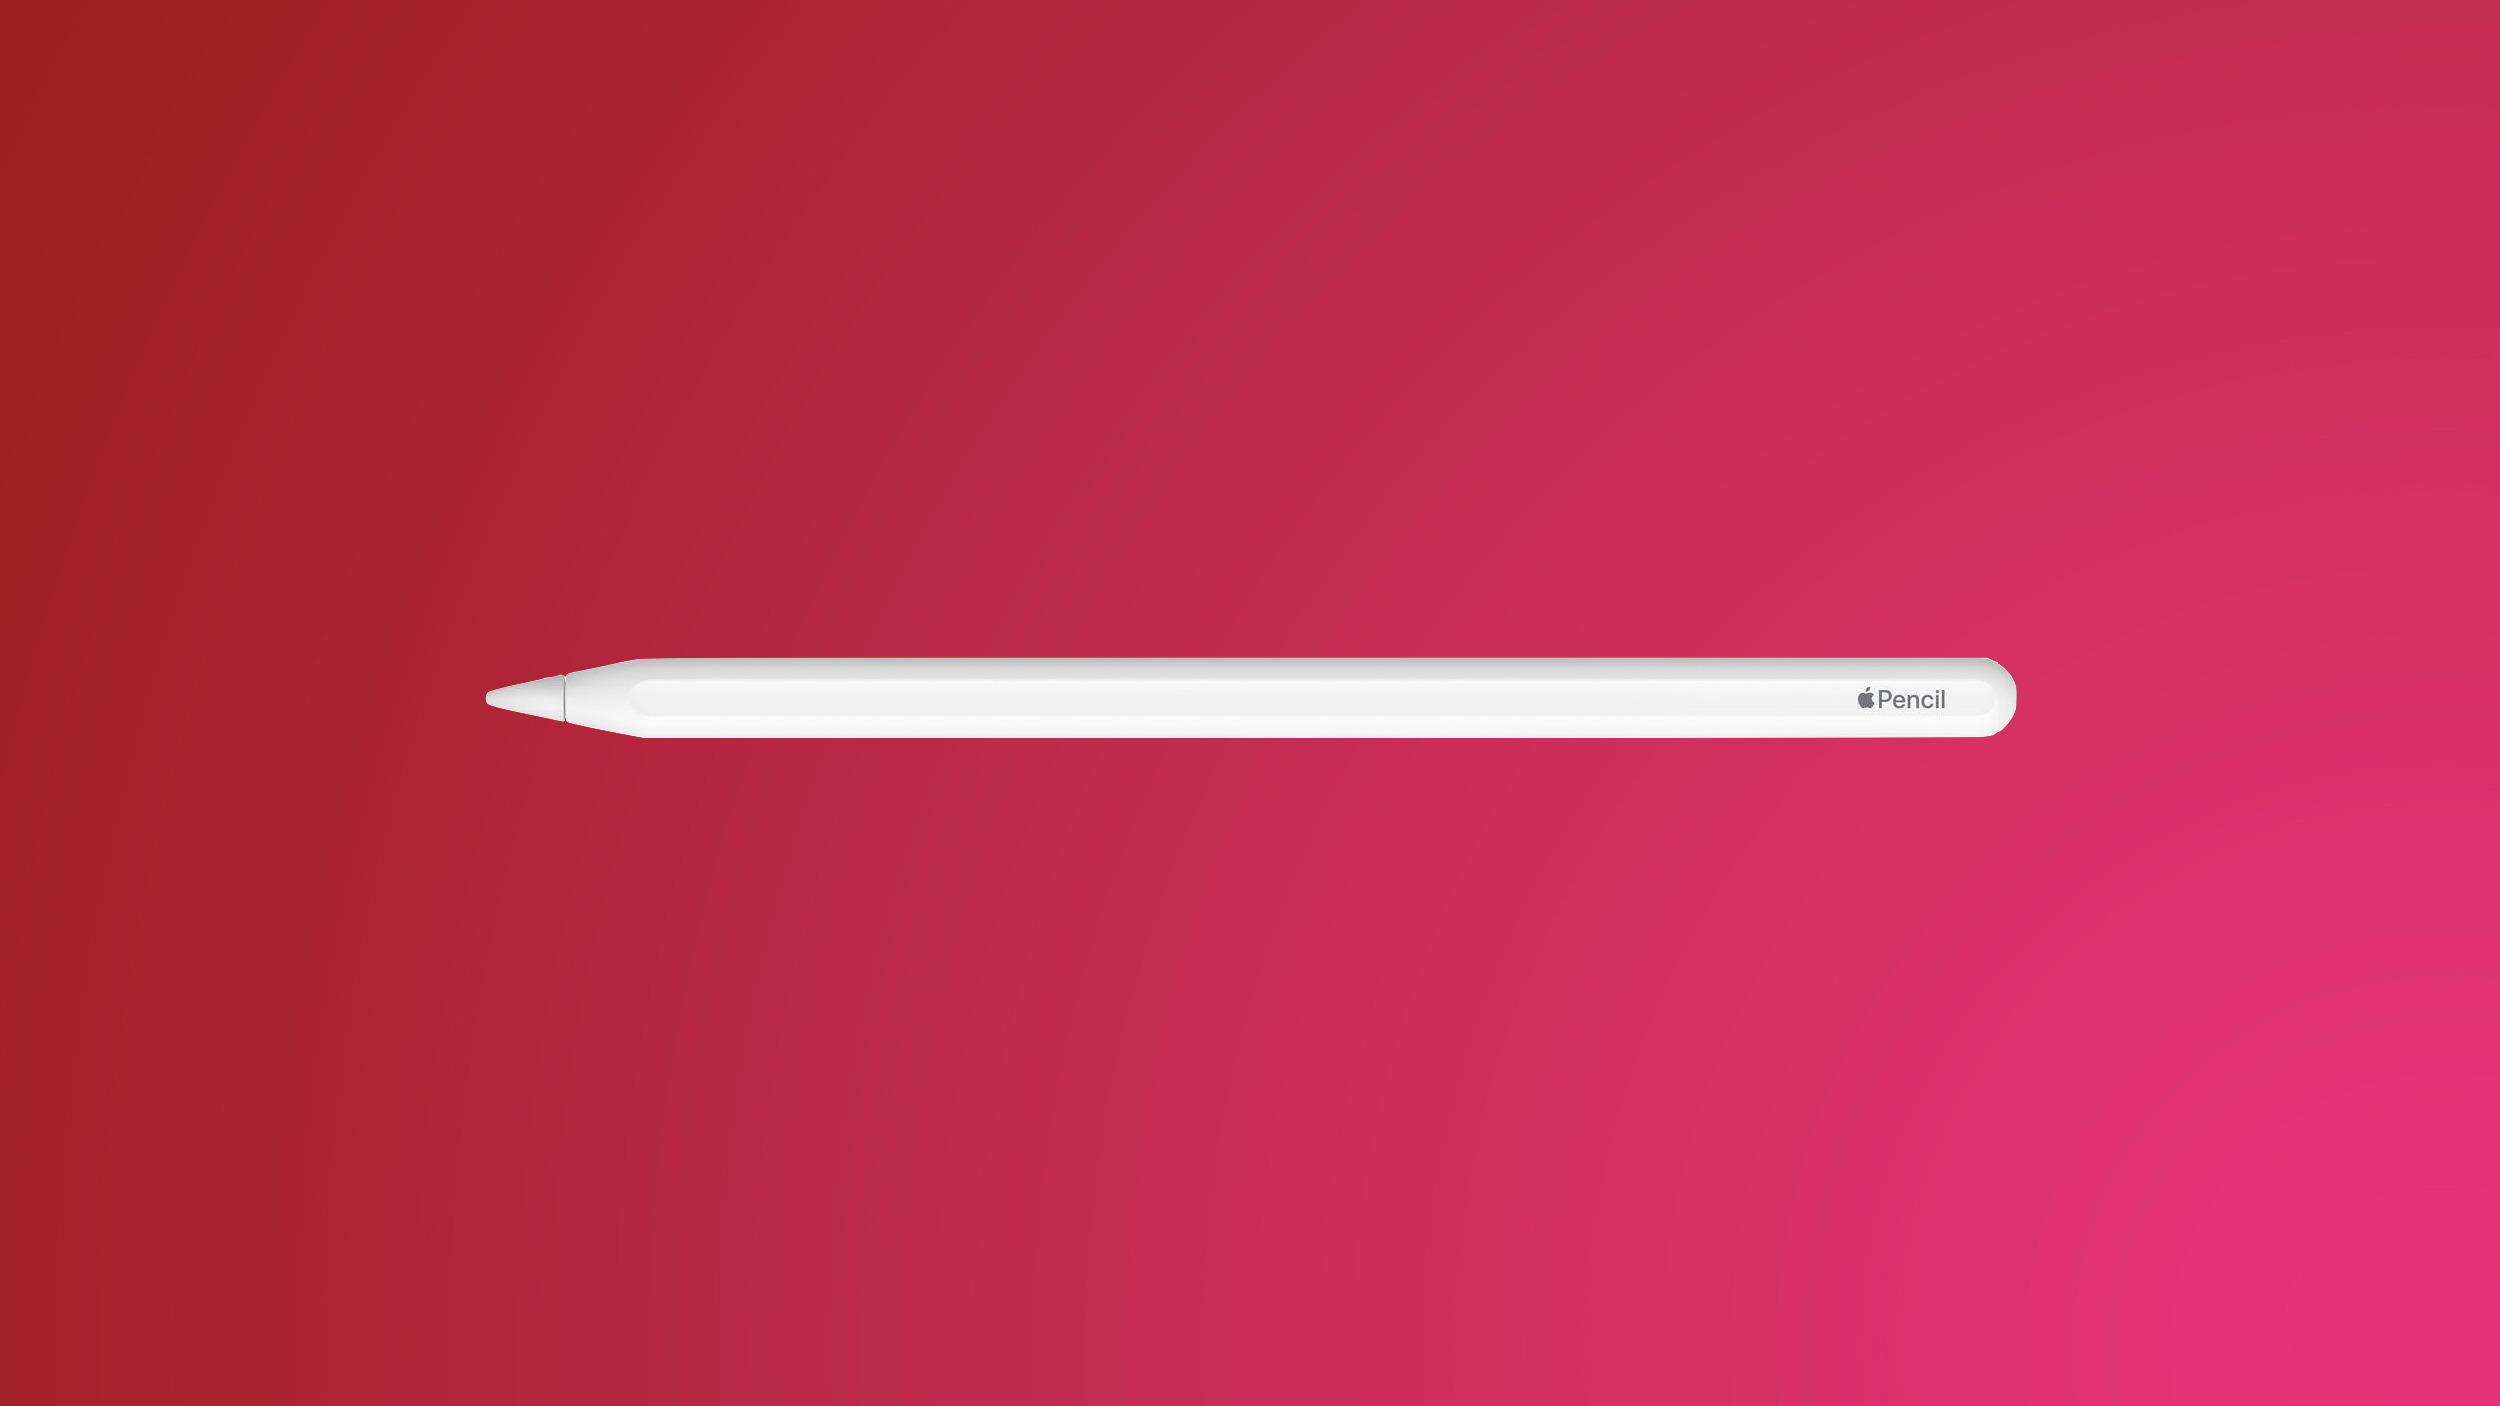 Deals: Apple Pencil 2 Drops to New Low Price of $89.00 ($40 Off)